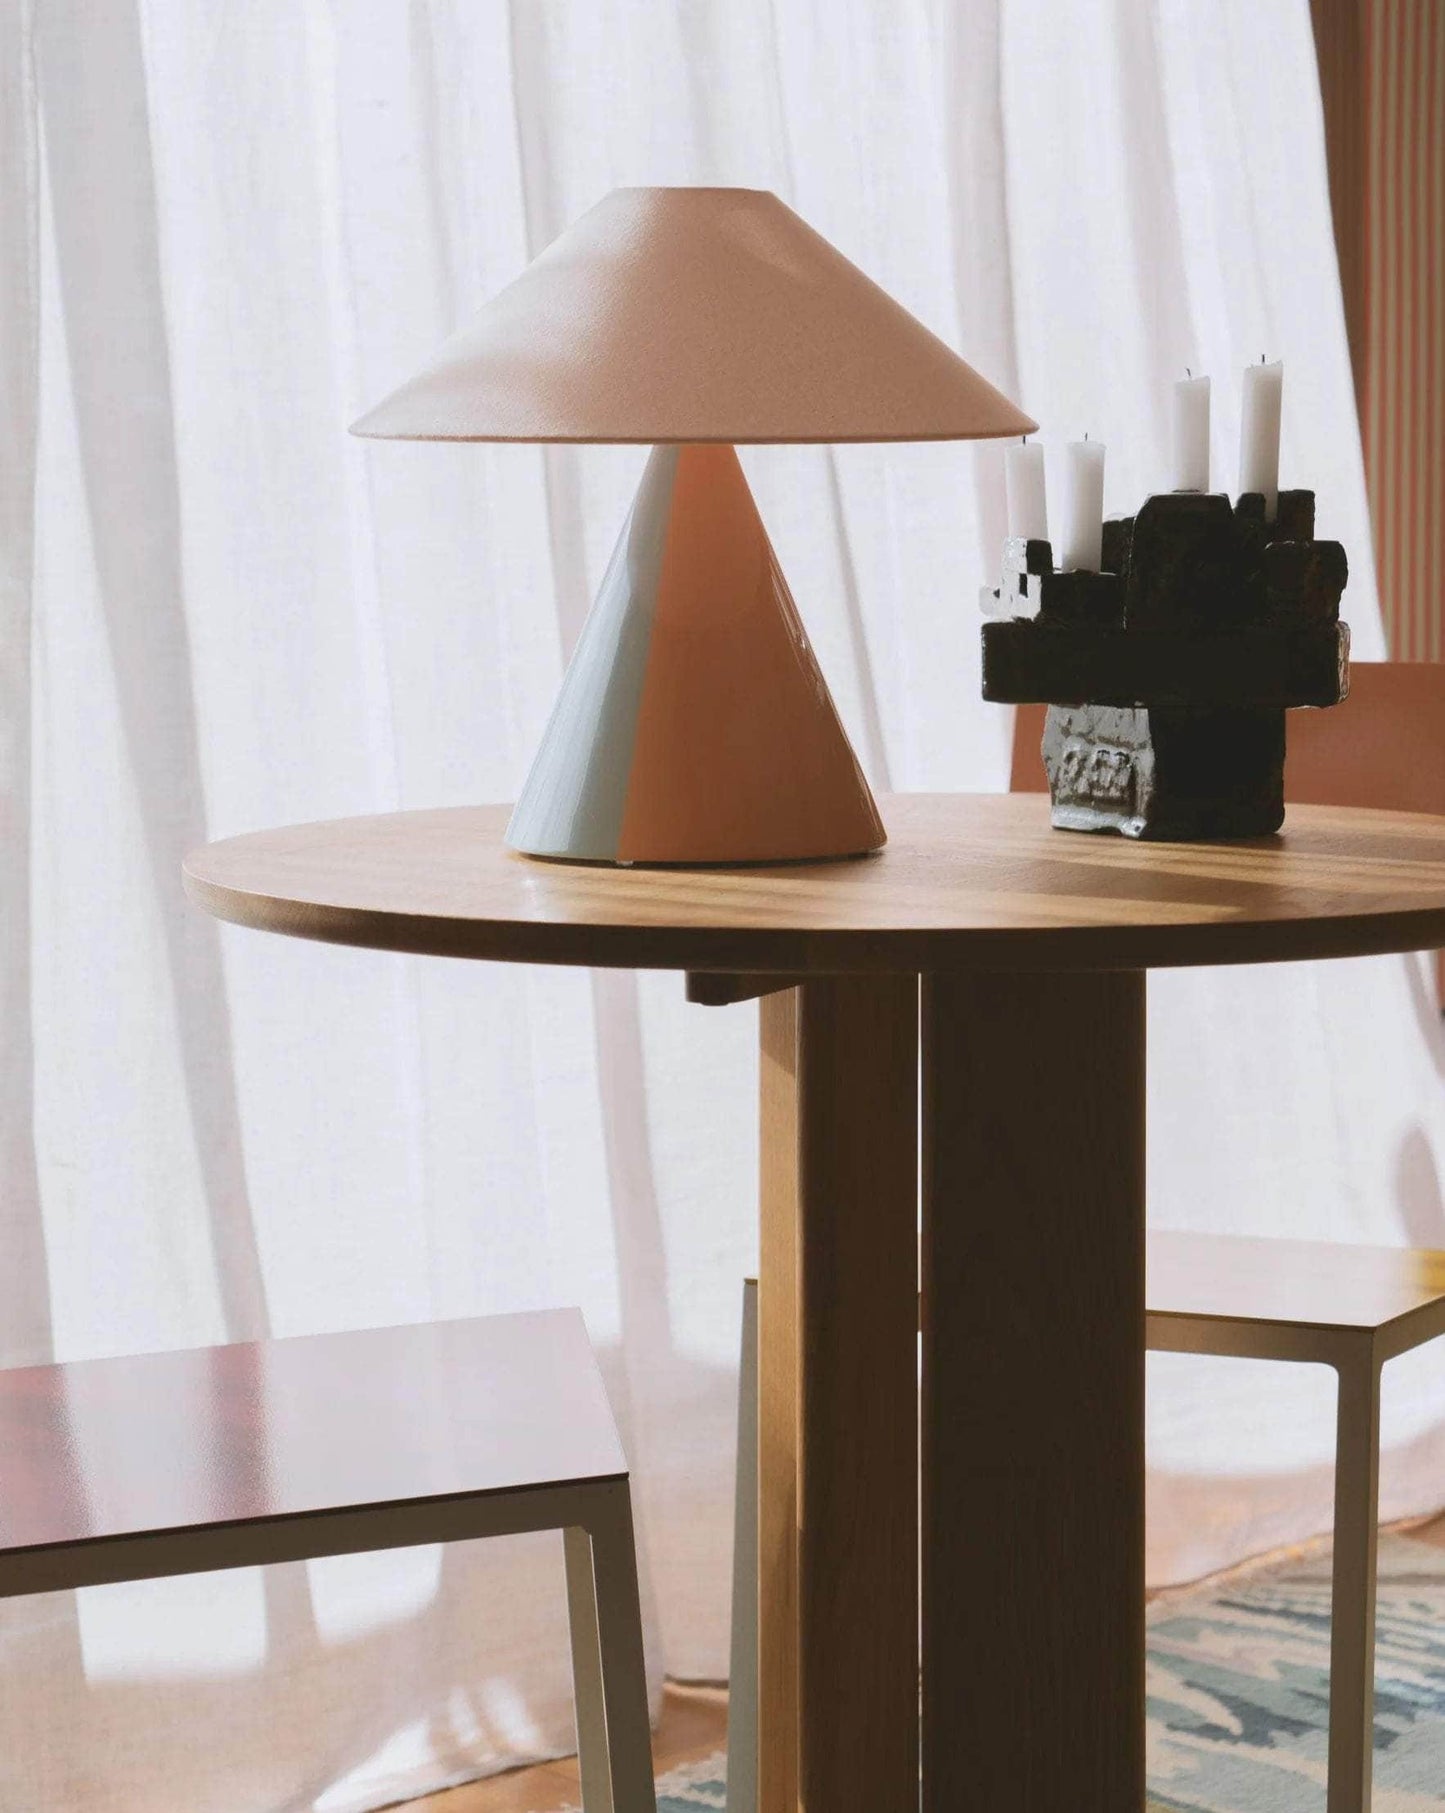 Load image into Gallery viewer, Caterina Peach + Sky blue Table Lamp
